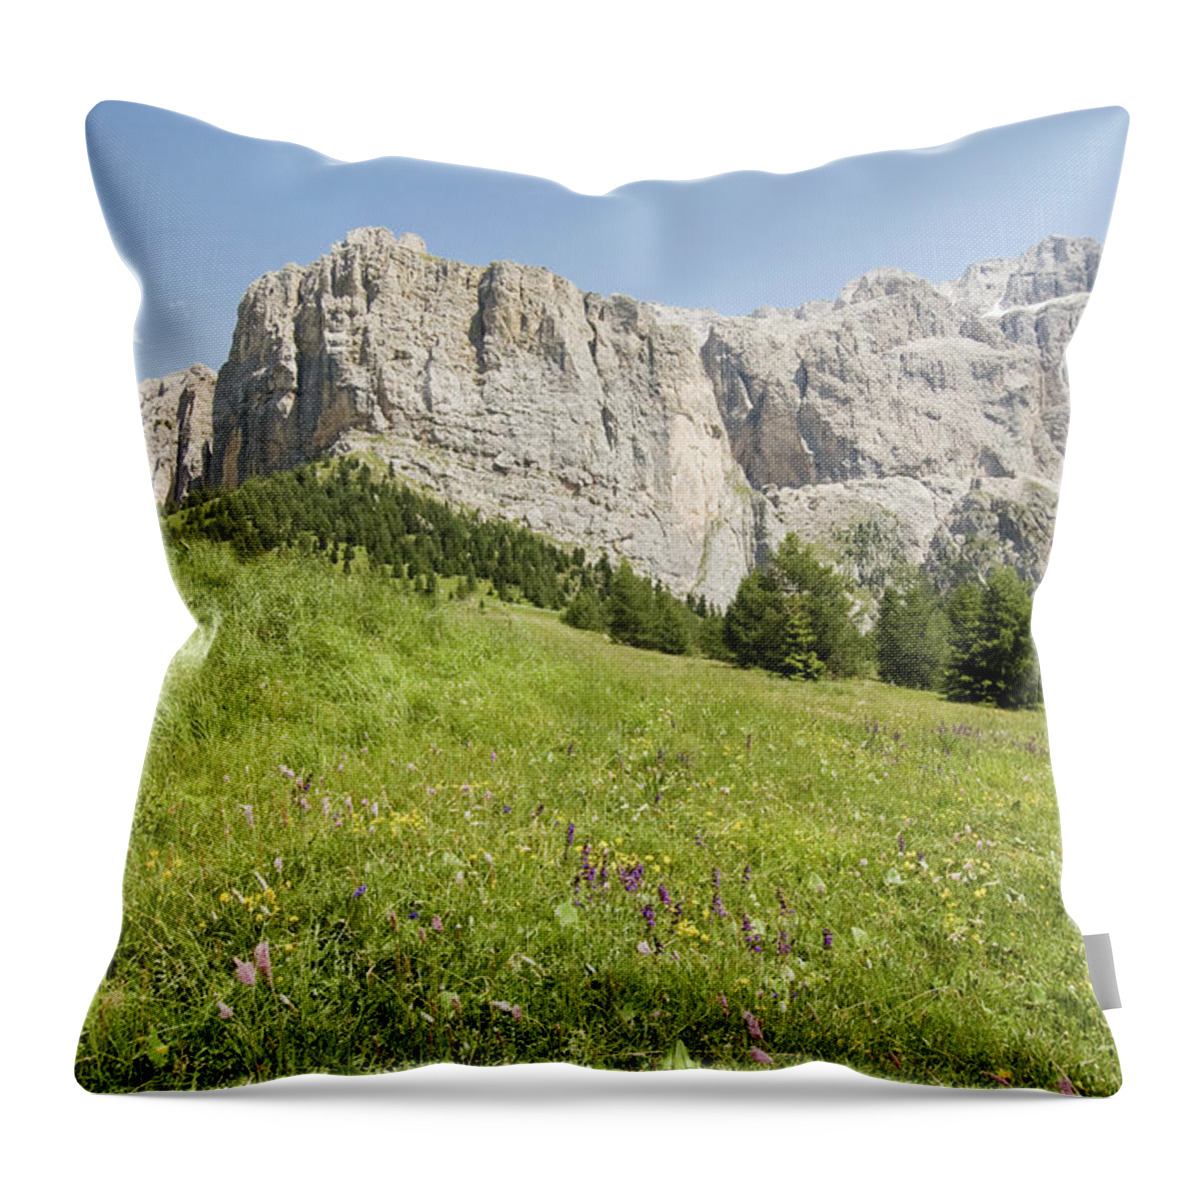 Eco Tourism Throw Pillow featuring the photograph South Tyrol Mountain Range by Hiphunter